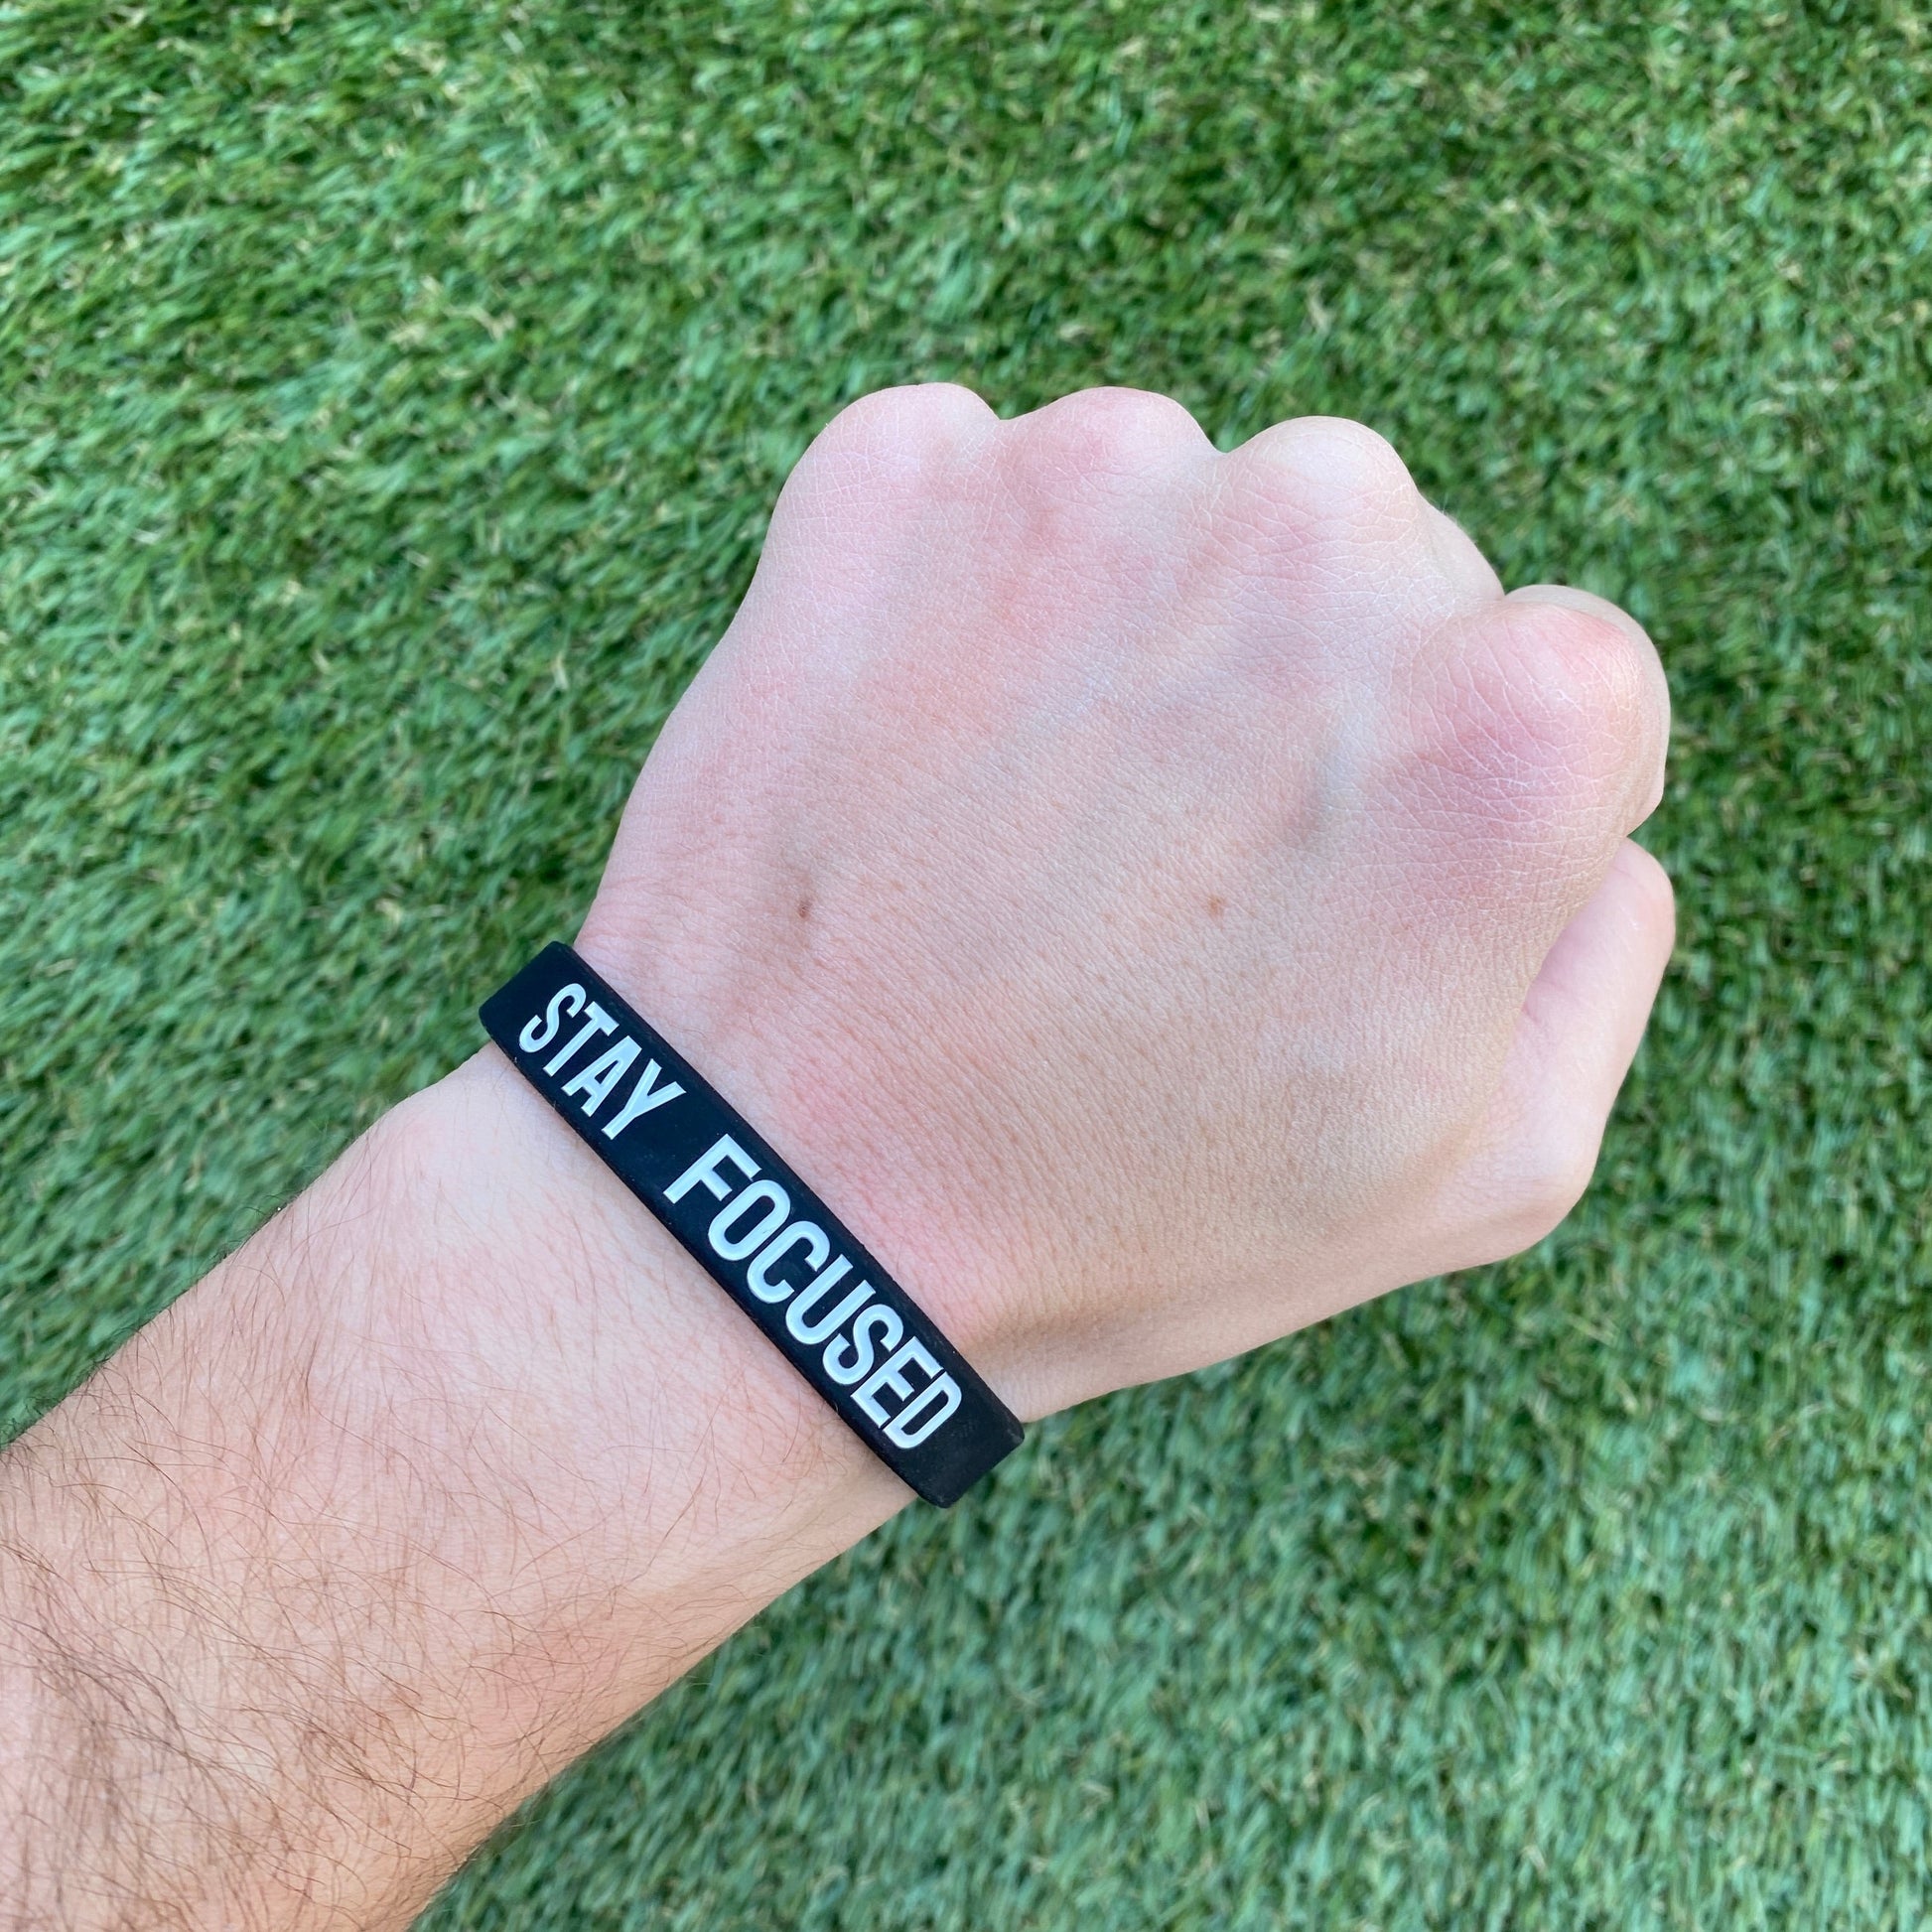 STAY FOCUSED Wristband - Southern Grace Creations